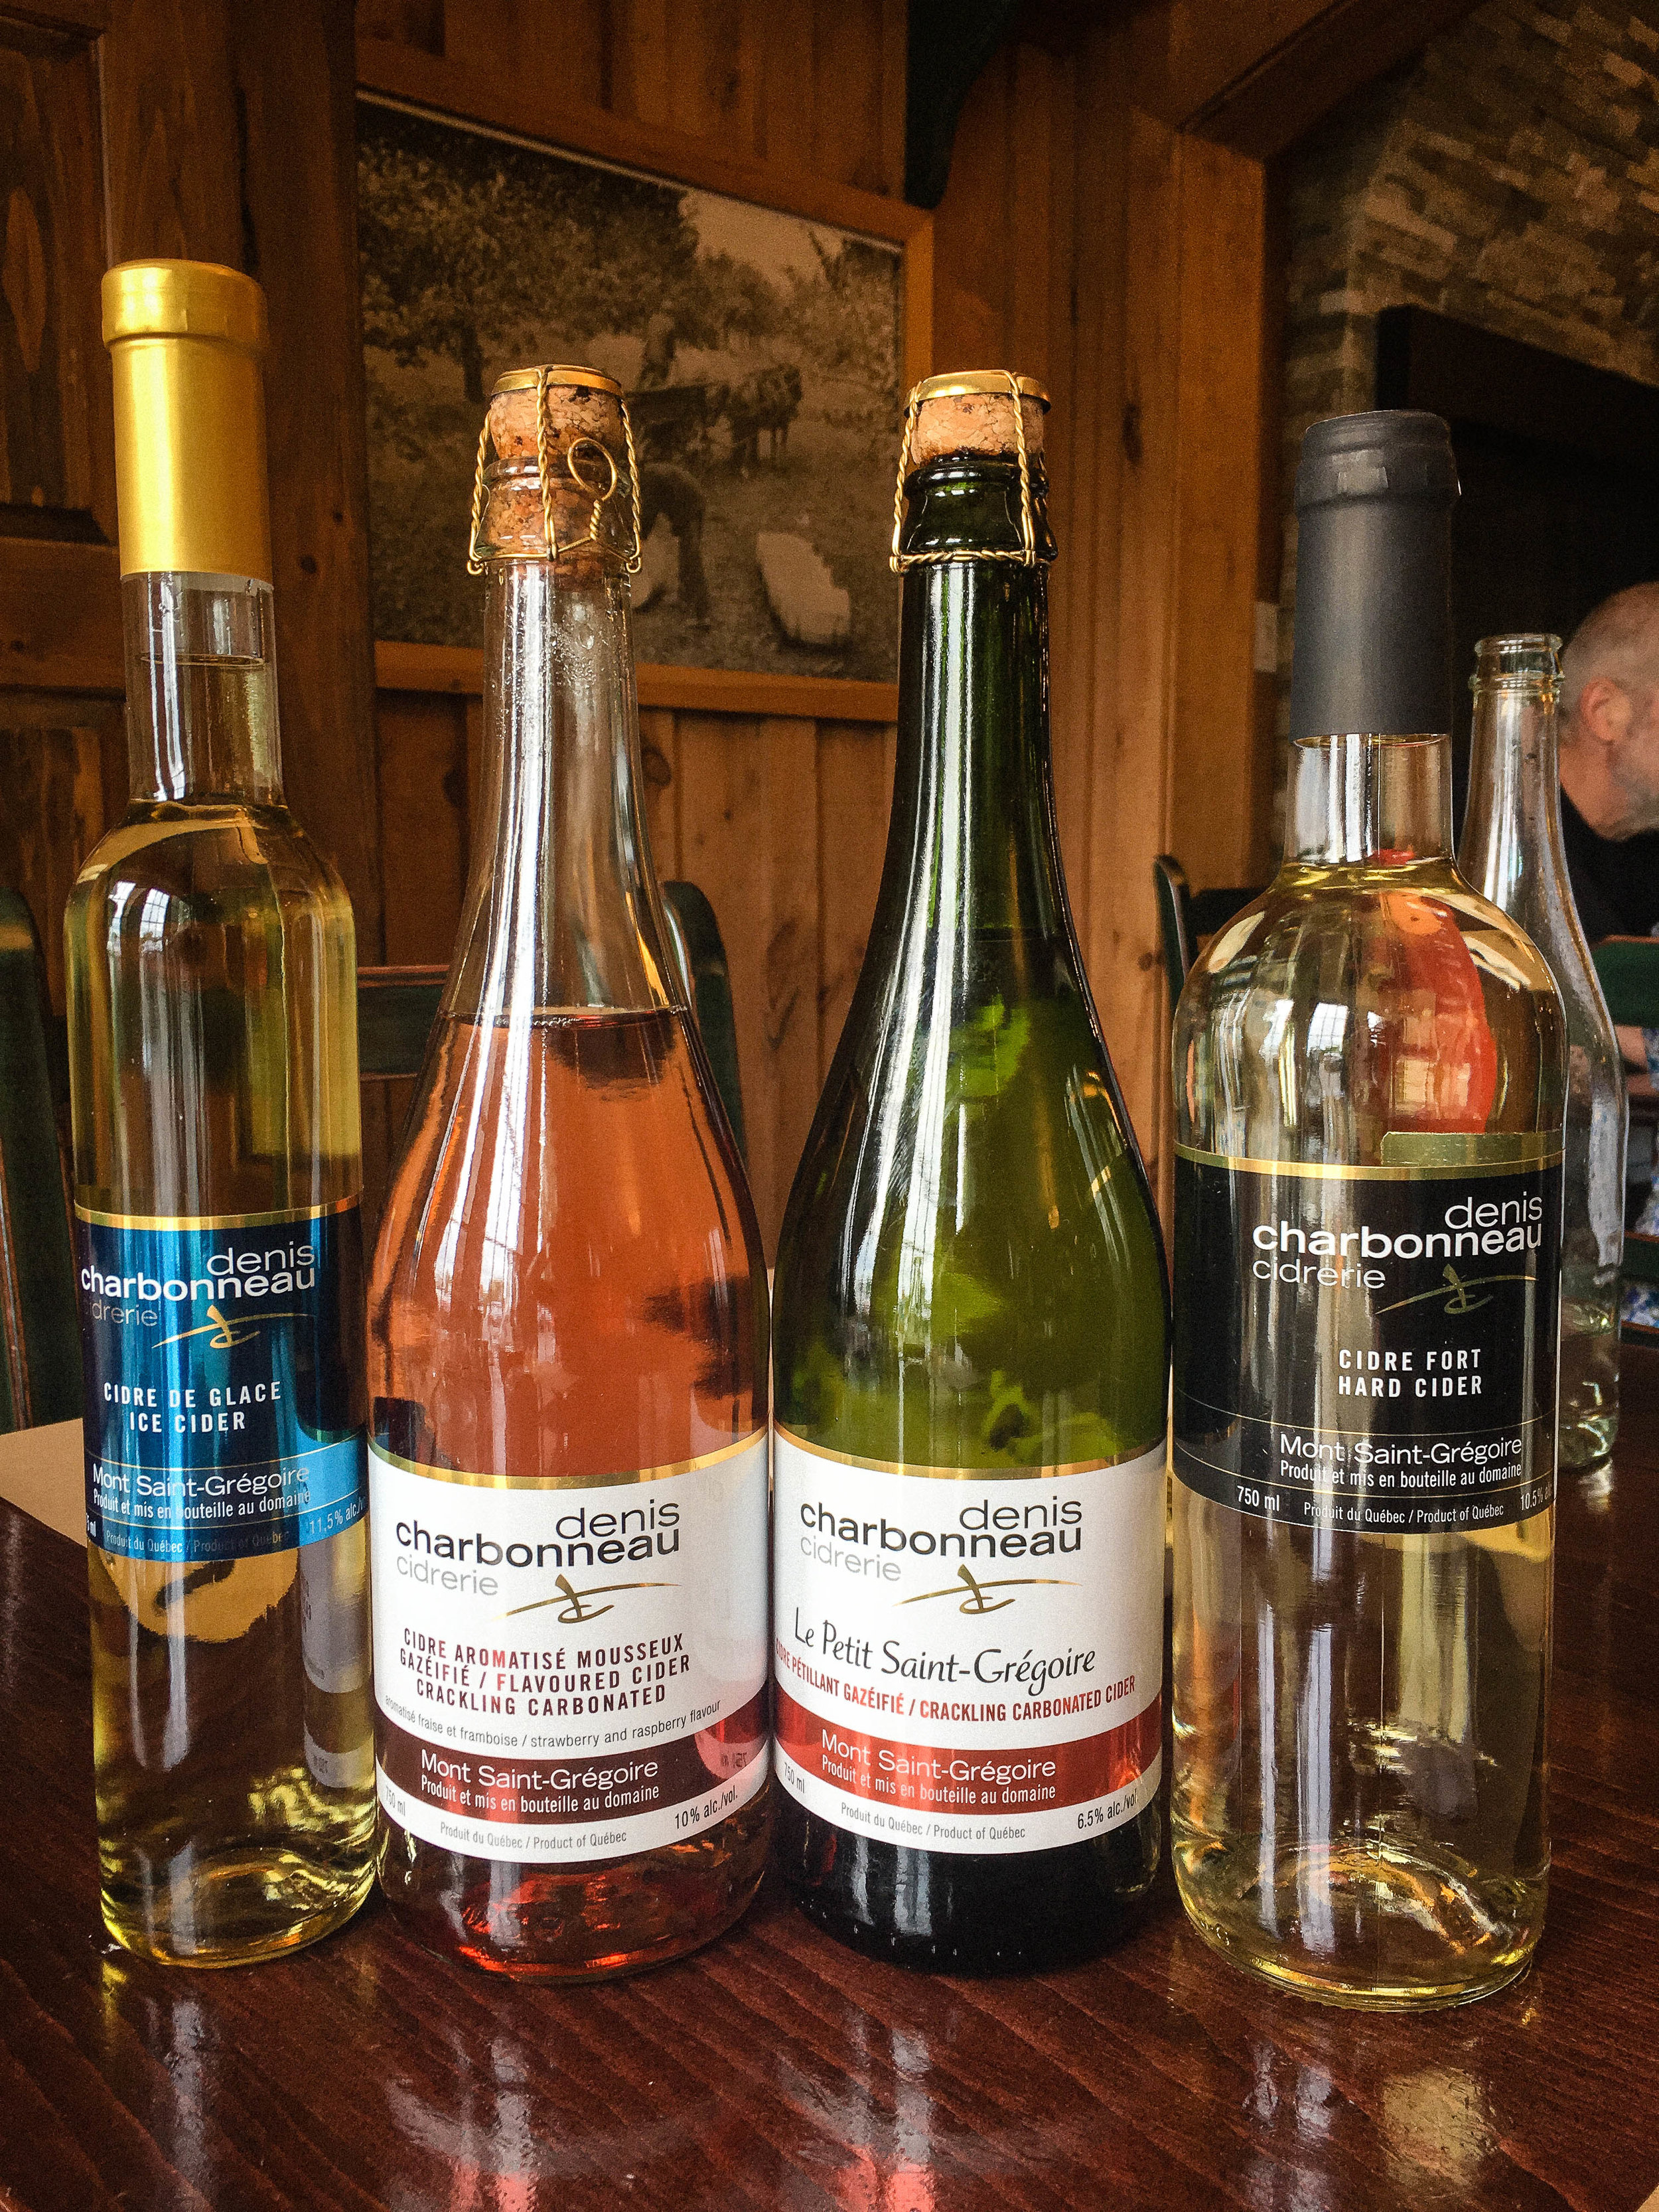 The different ciders offered at Denis Charbonneau